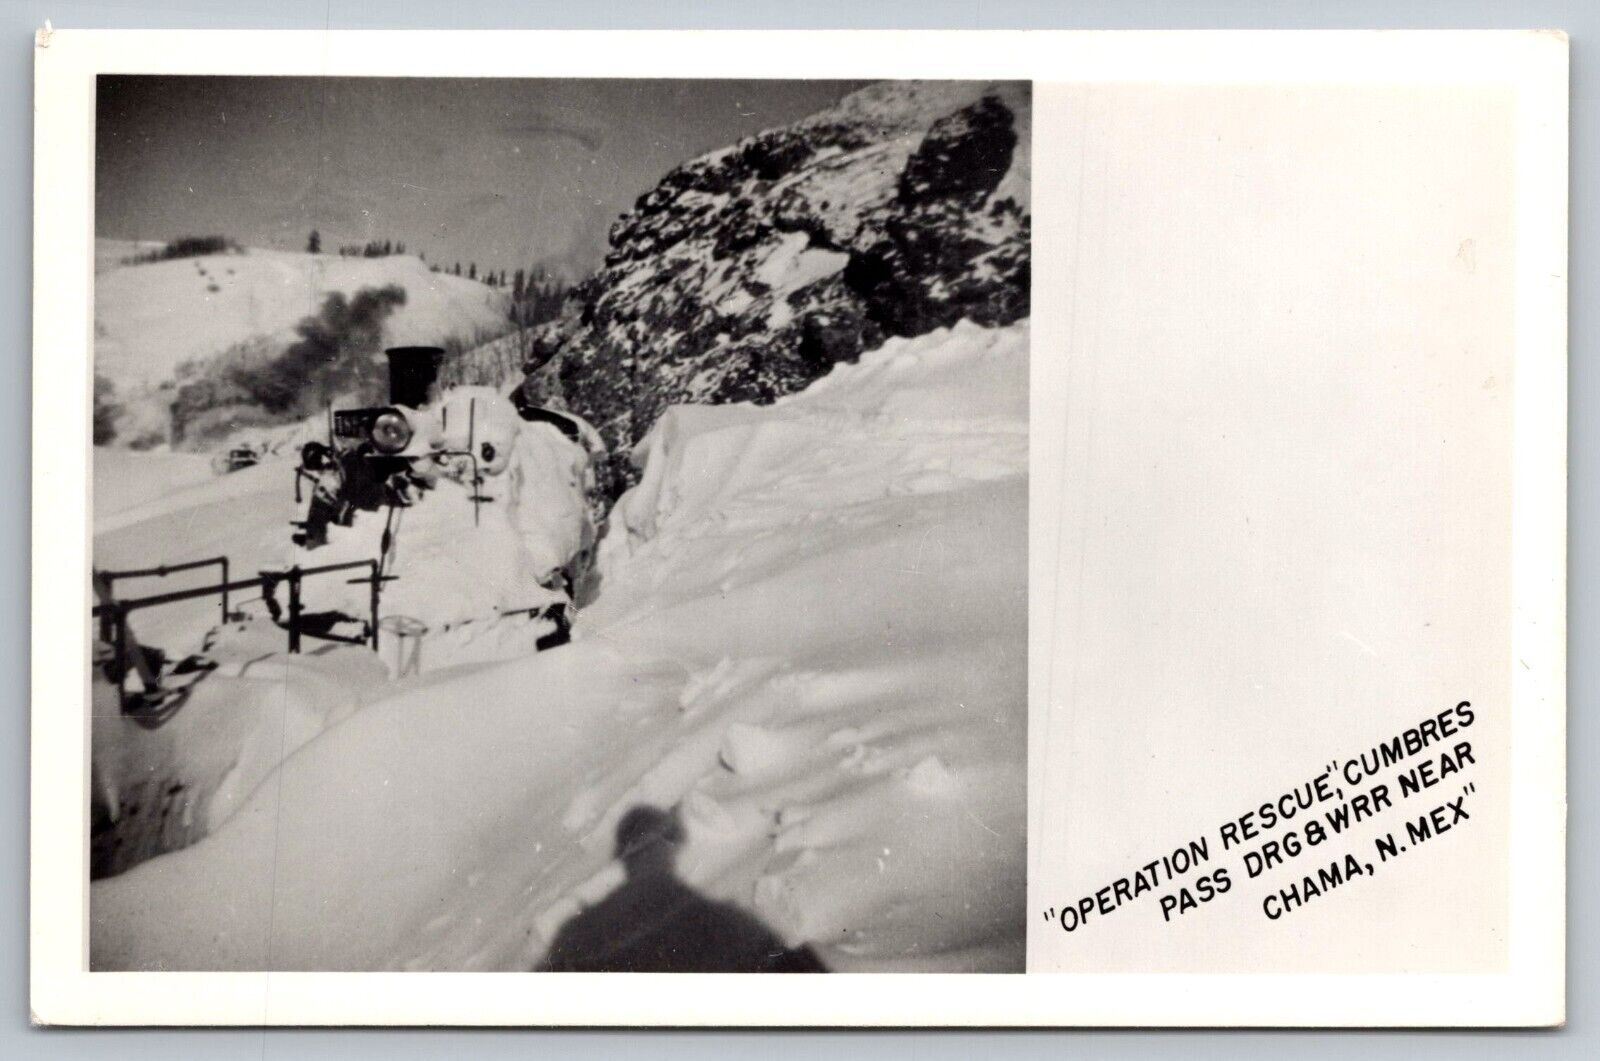 Operation Rescues. Train Trapped In Snow. Chama NM. Real Photo Postcard. RPPC